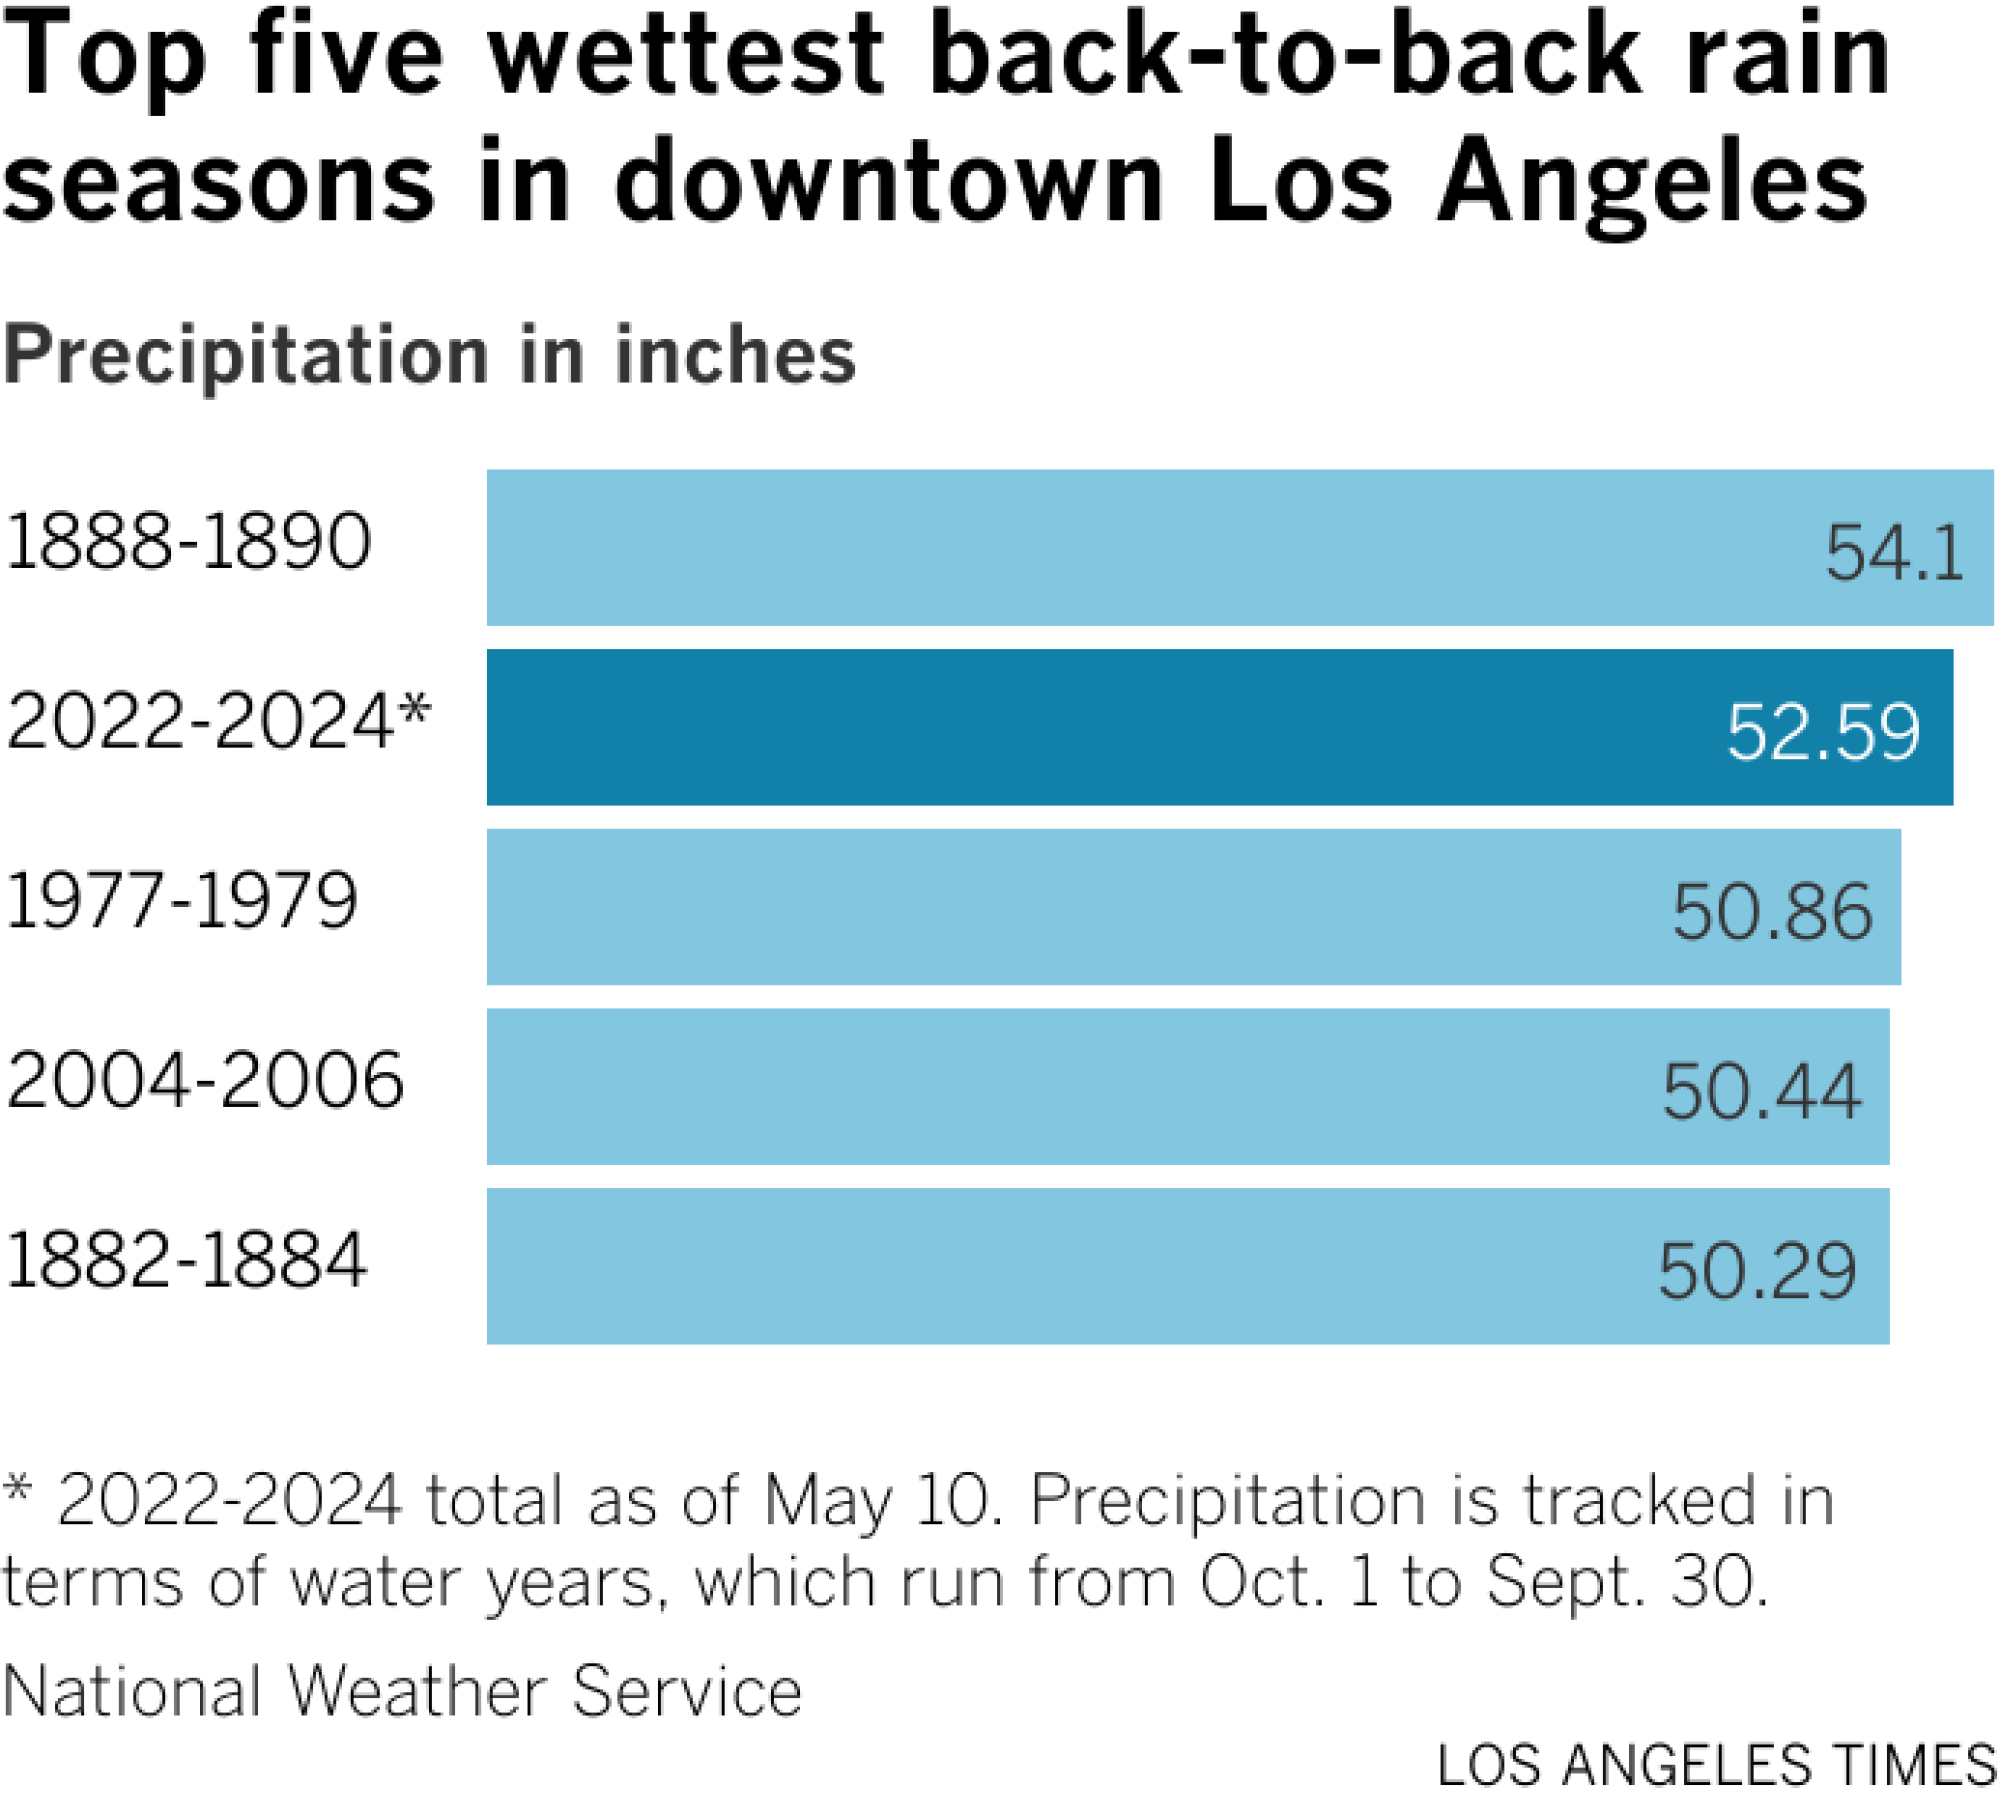 A bar chart shows the five wettest rain seasons in downtown LA. October 1888 to 1890 had the most rain at 54.1 inches, followed by 2022 to 2024. 